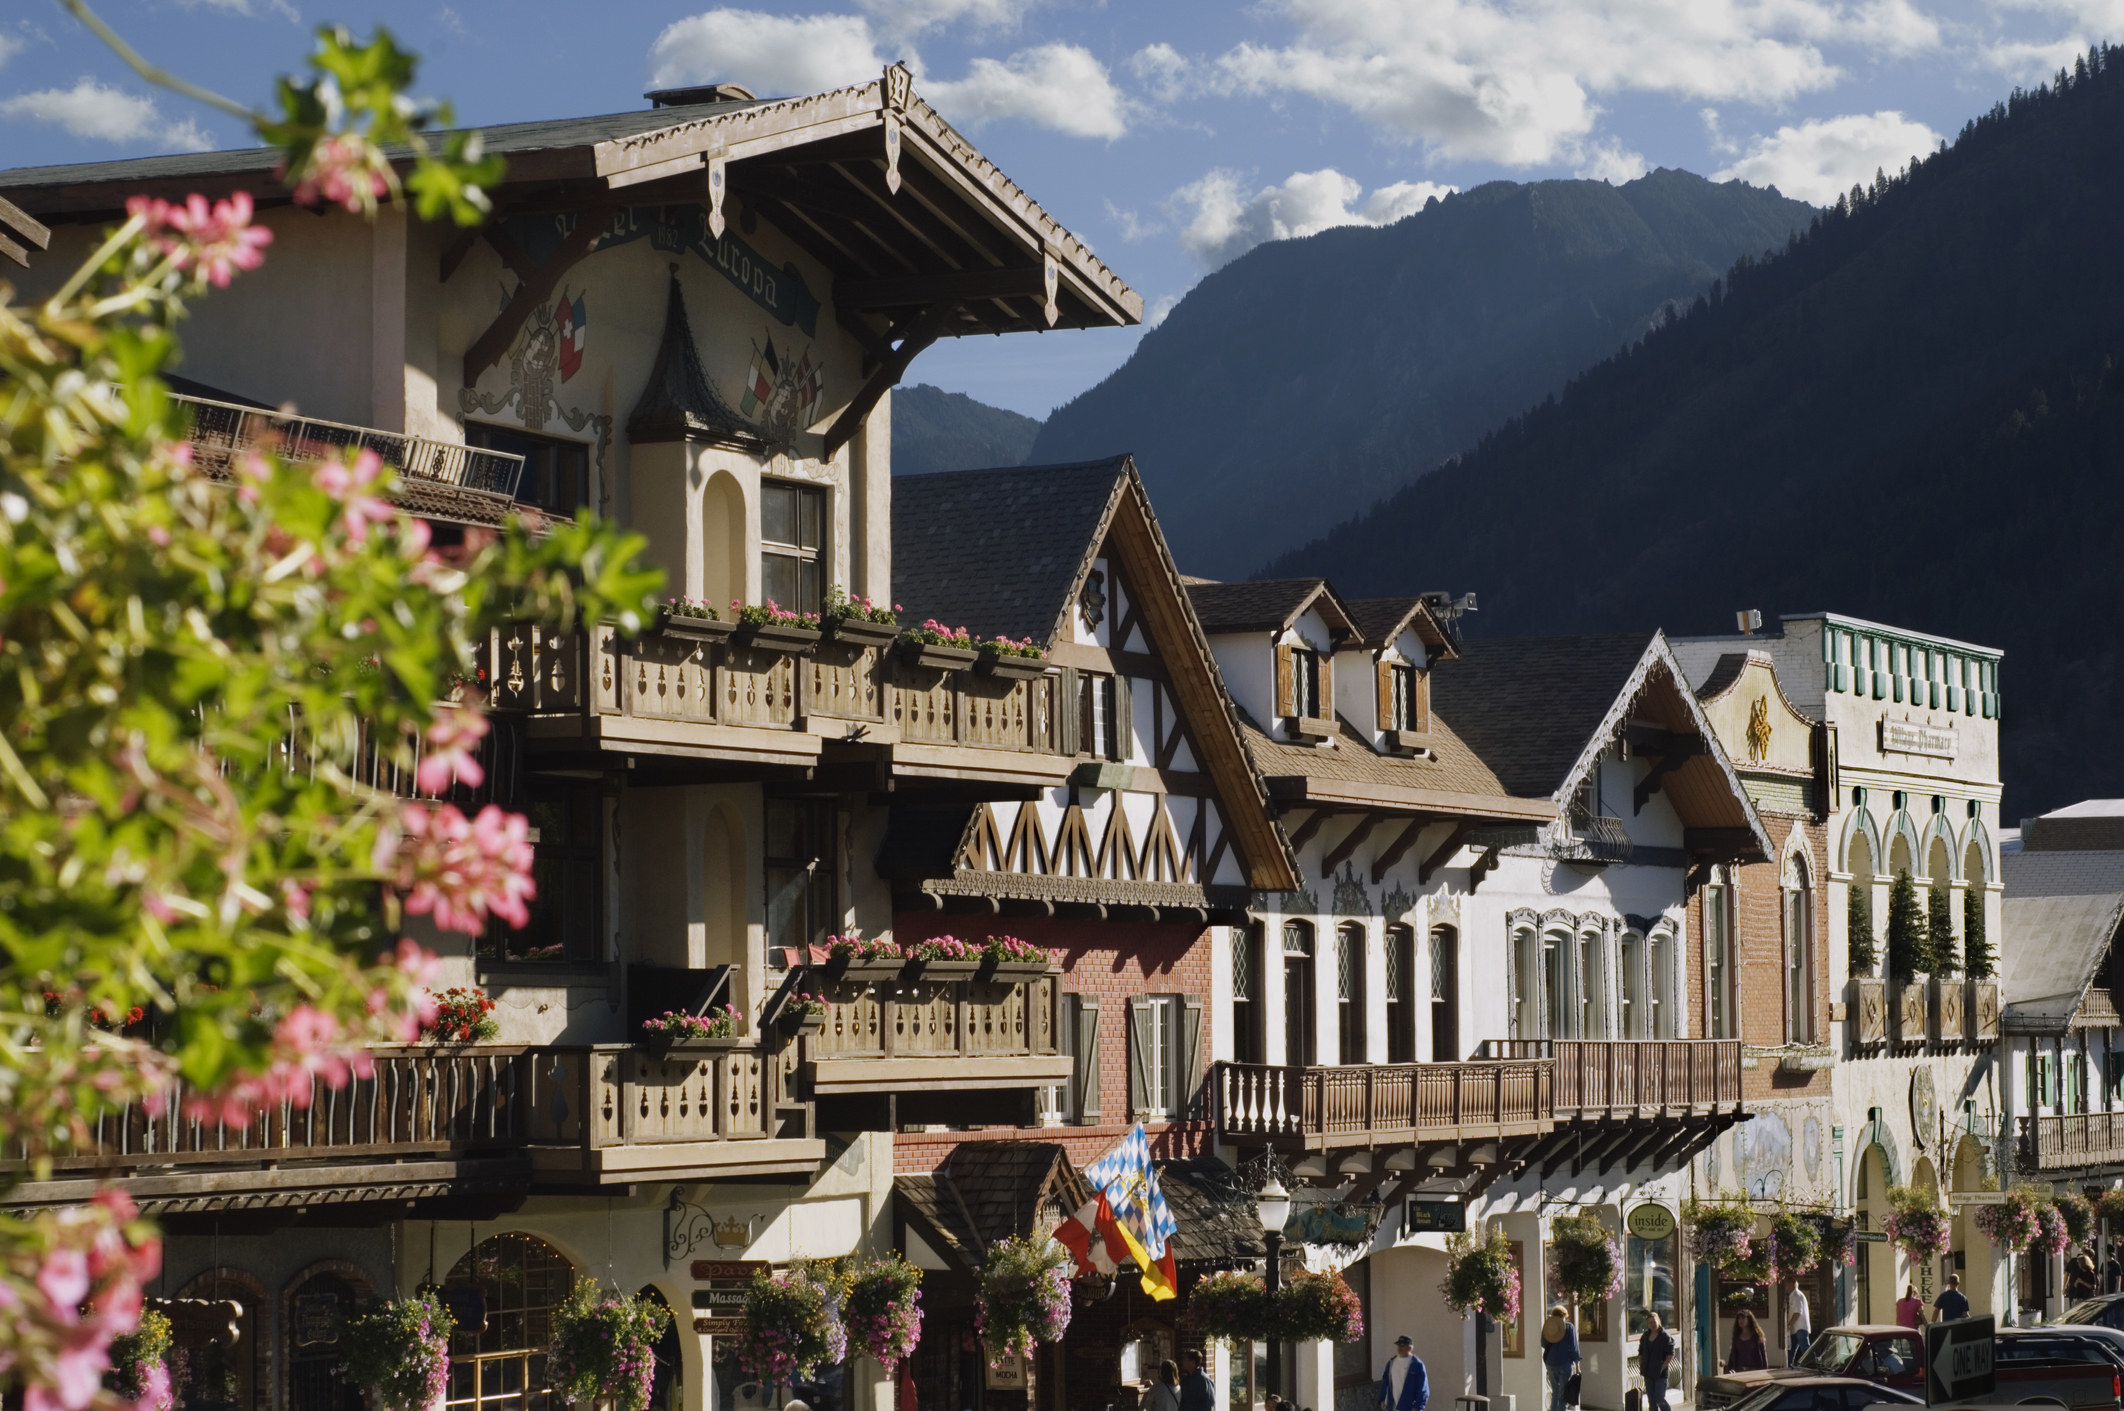 A Bavarian-style village located near the Cascade Mountains